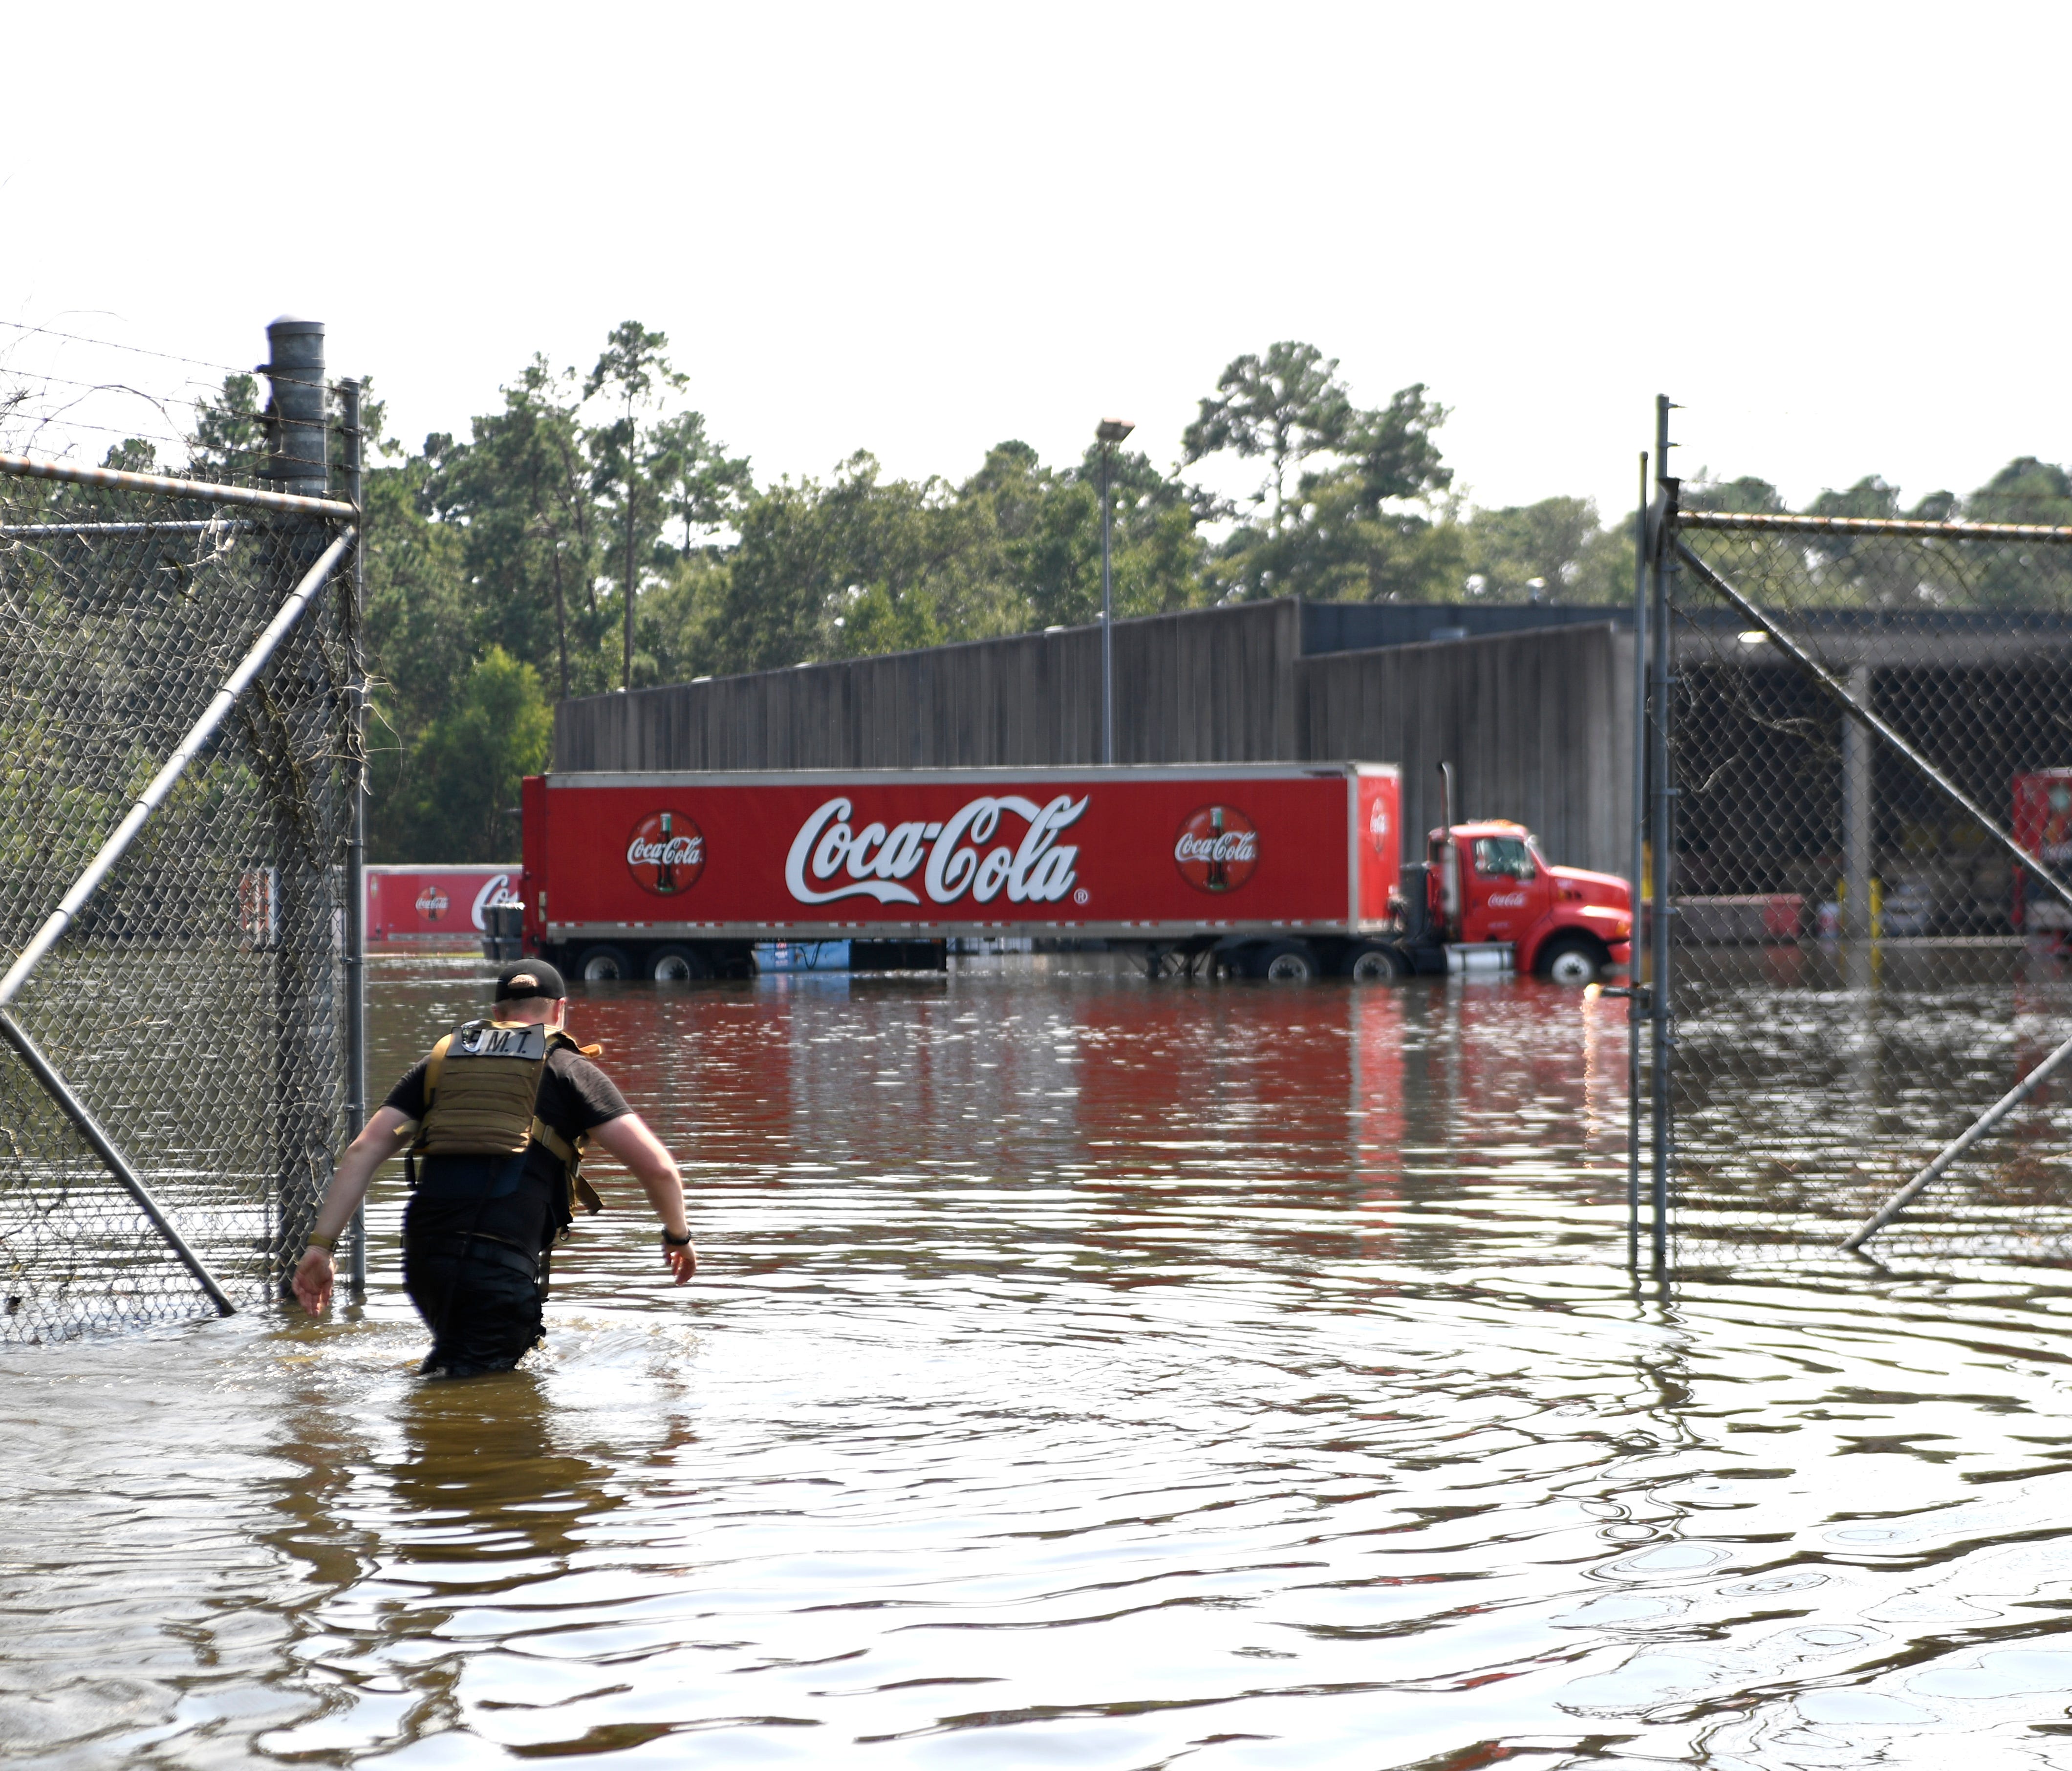 Sam Byers, an EMT from Arlington, Texas, wades past the gates of the Coca-Cola warehouse in Beaumont to get uncontaminated water on Sept. 2, 2017.